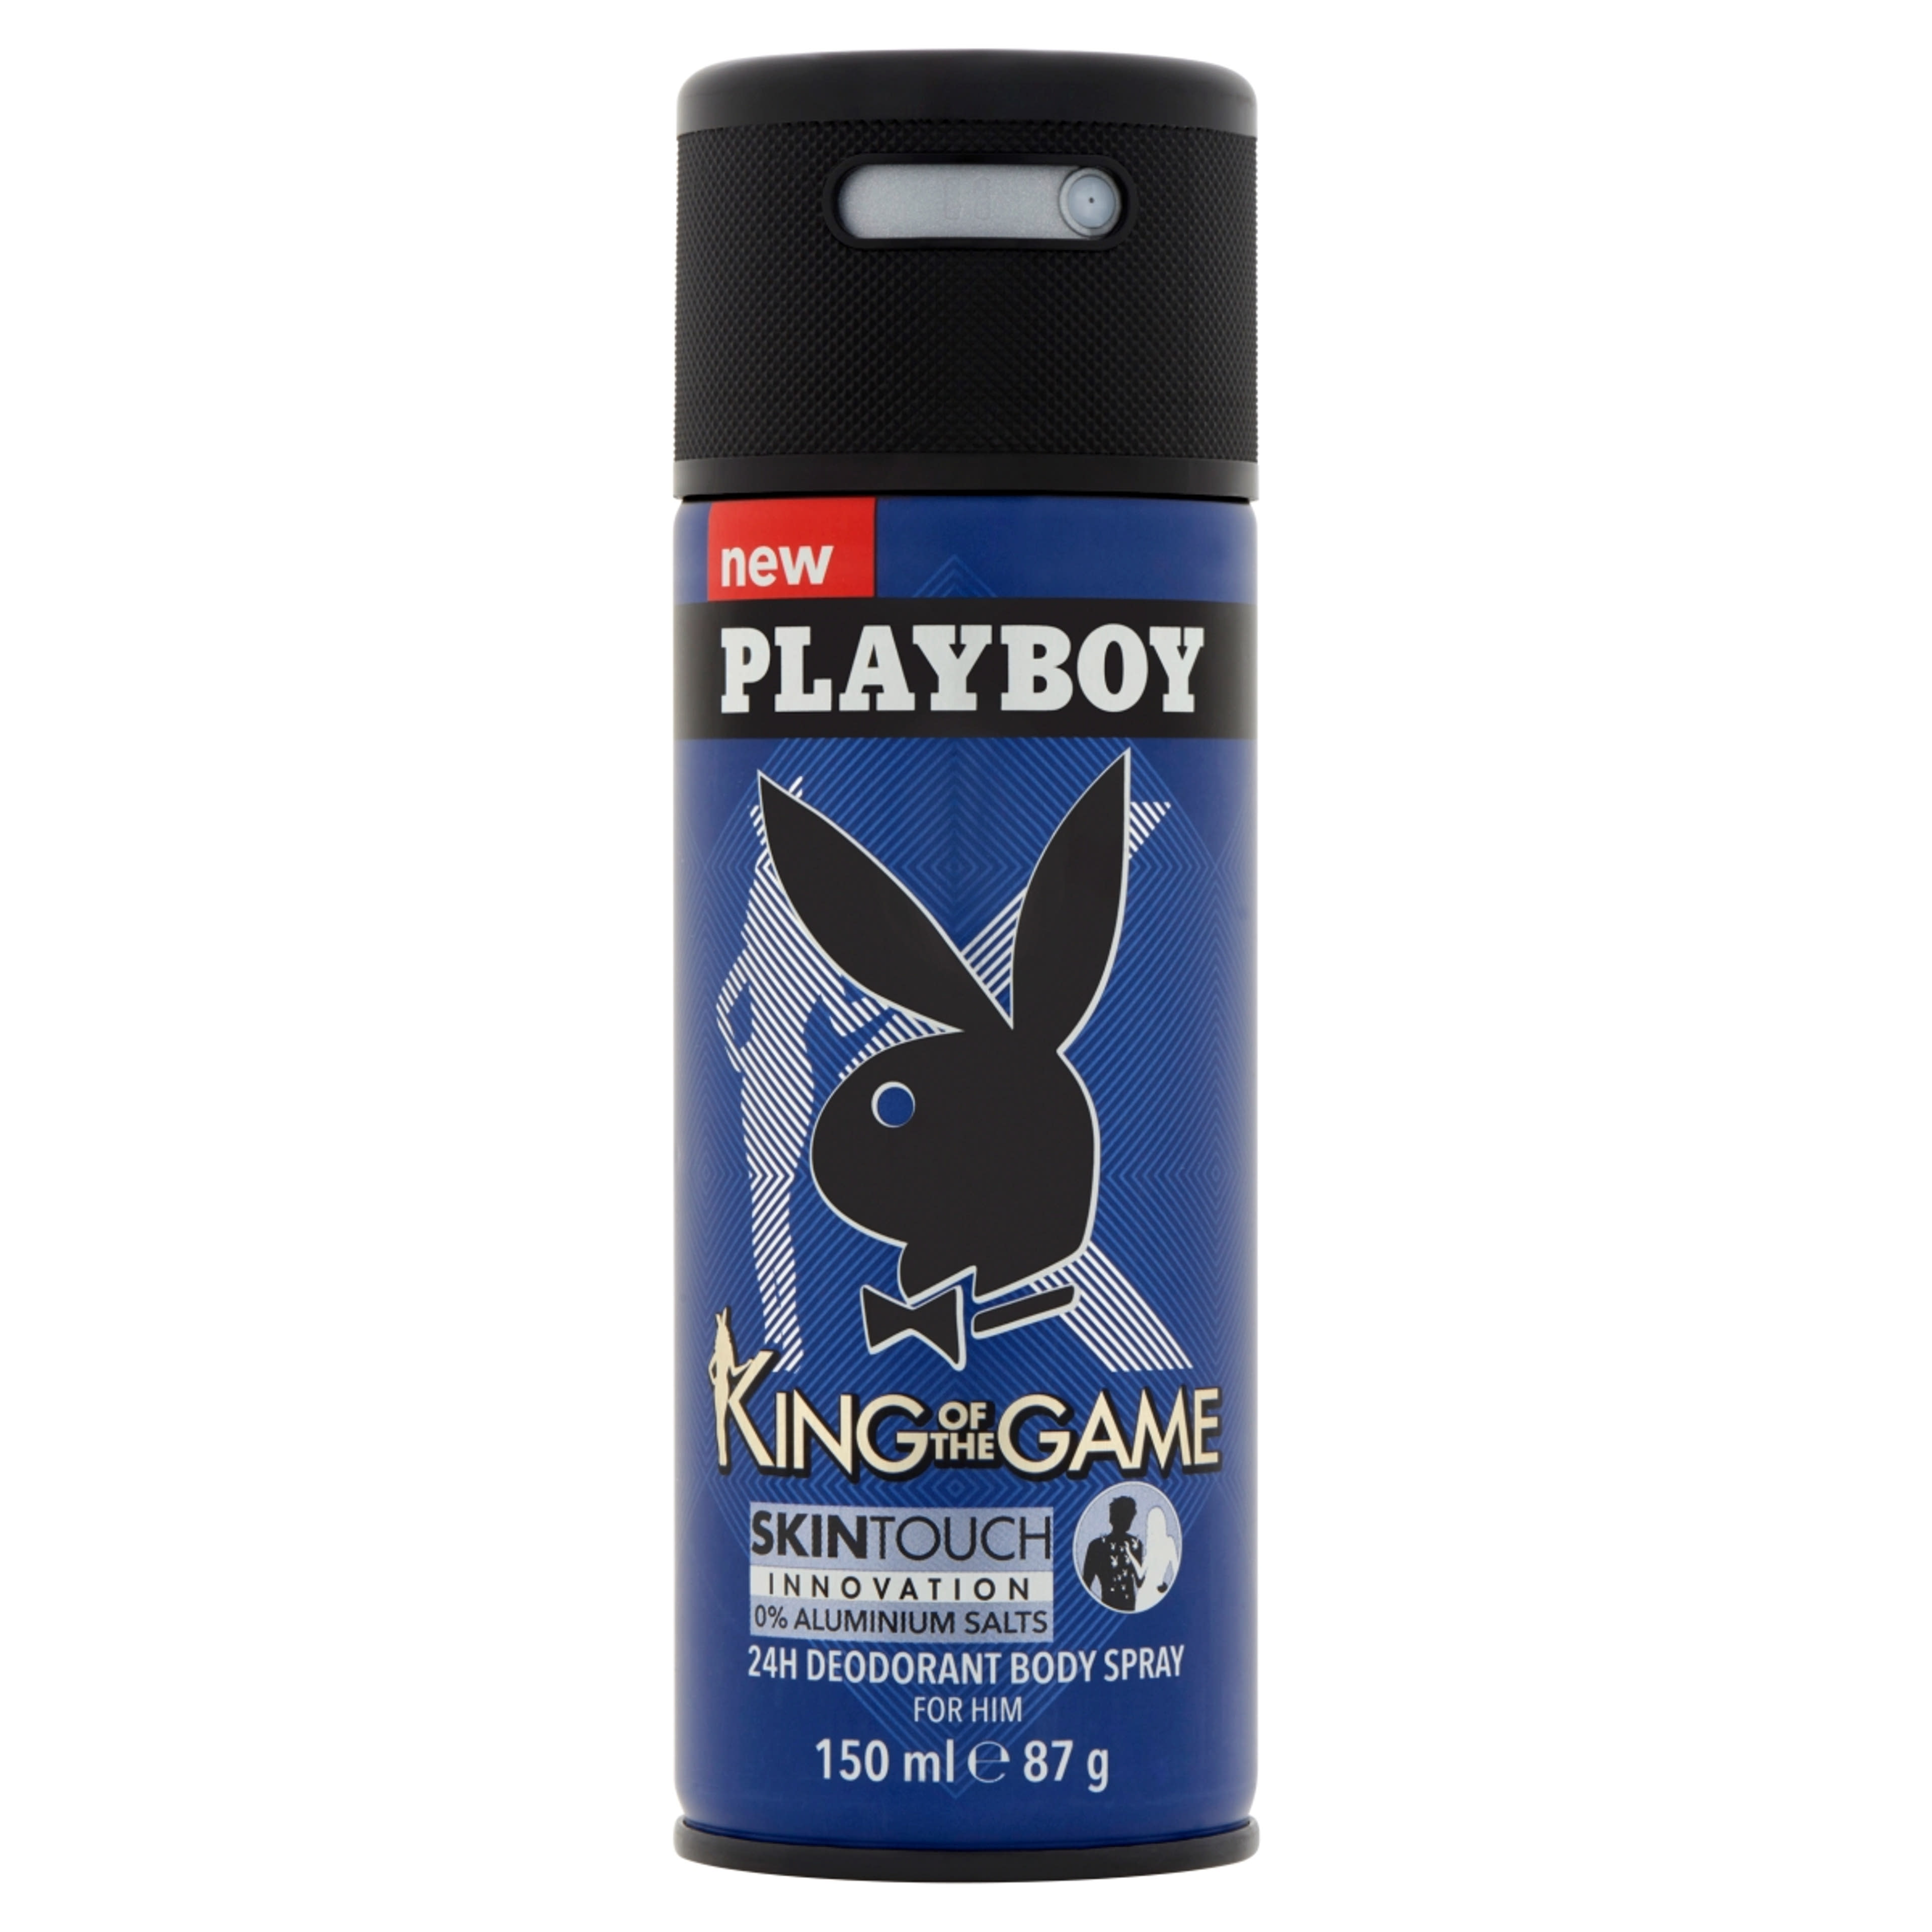 Playboy King of the Game dezodor - 150 ml